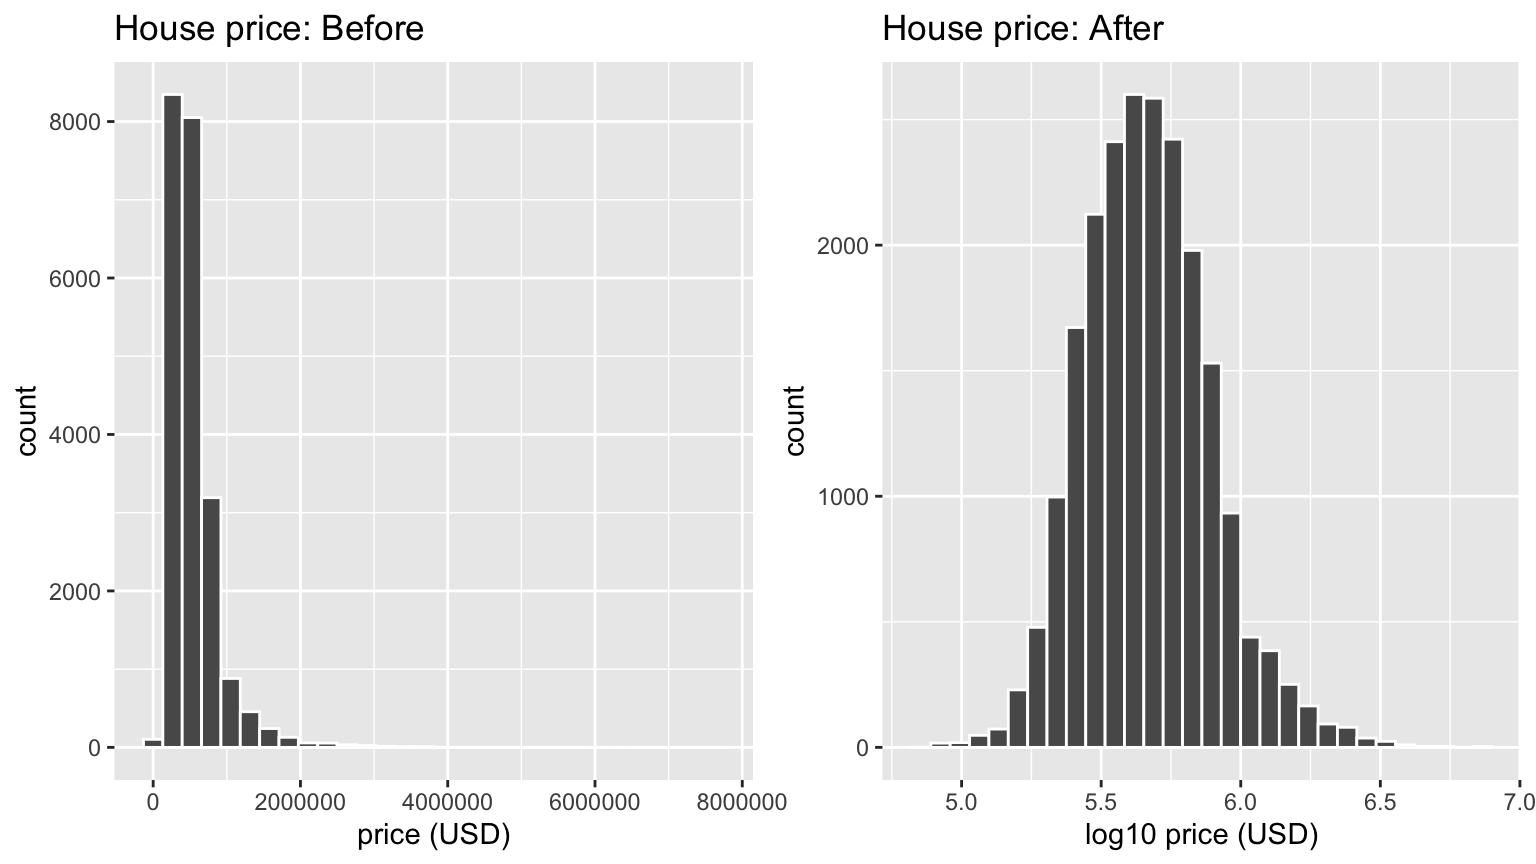 House price before and after log10-transformation.